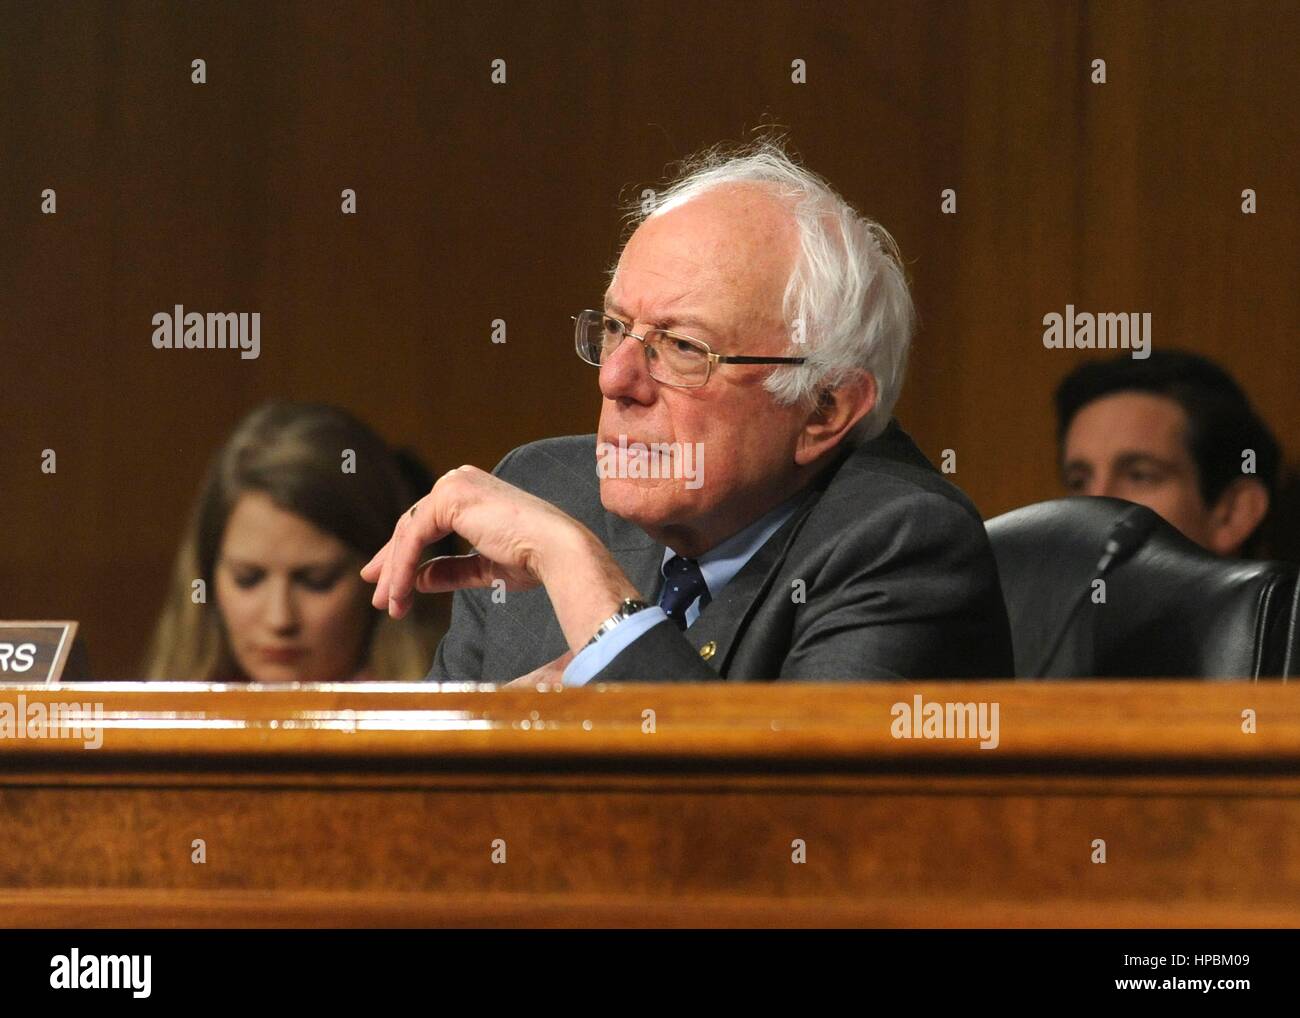 U.S. Senator Bernie Sanders, of Vermont asks a question of Dr. David Shulkin during confirmation hearings in the Senate Veterans Affairs Committee February 1, 2017 in Washington, DC. Shulkin was confirmed as the new head of the Veterans Affairs administration by a unanimous vote. Stock Photo